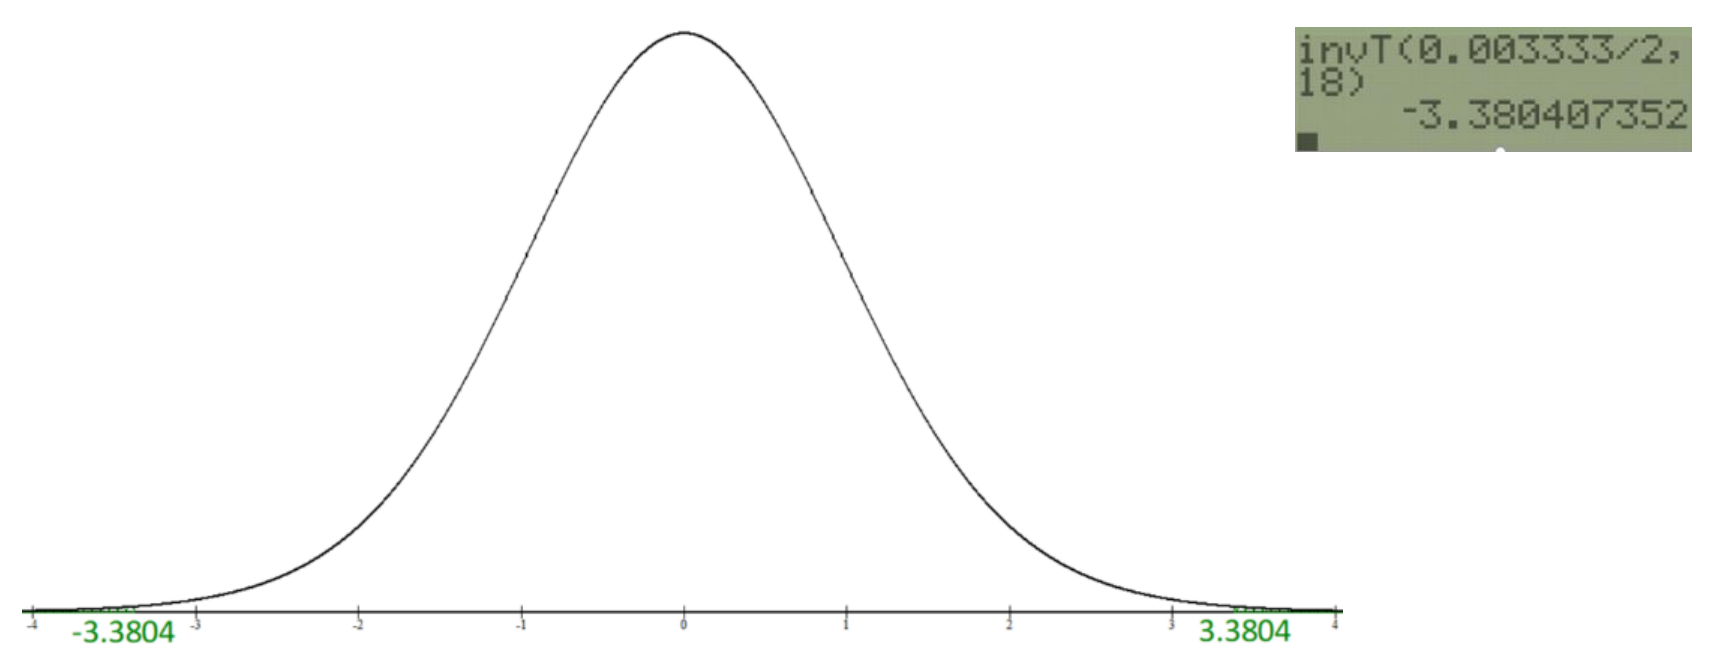 Graph of the t-distribution, with critical values of 3.3804 and -3.3804 marked. Also shows the calculator commands for finding the critical values.